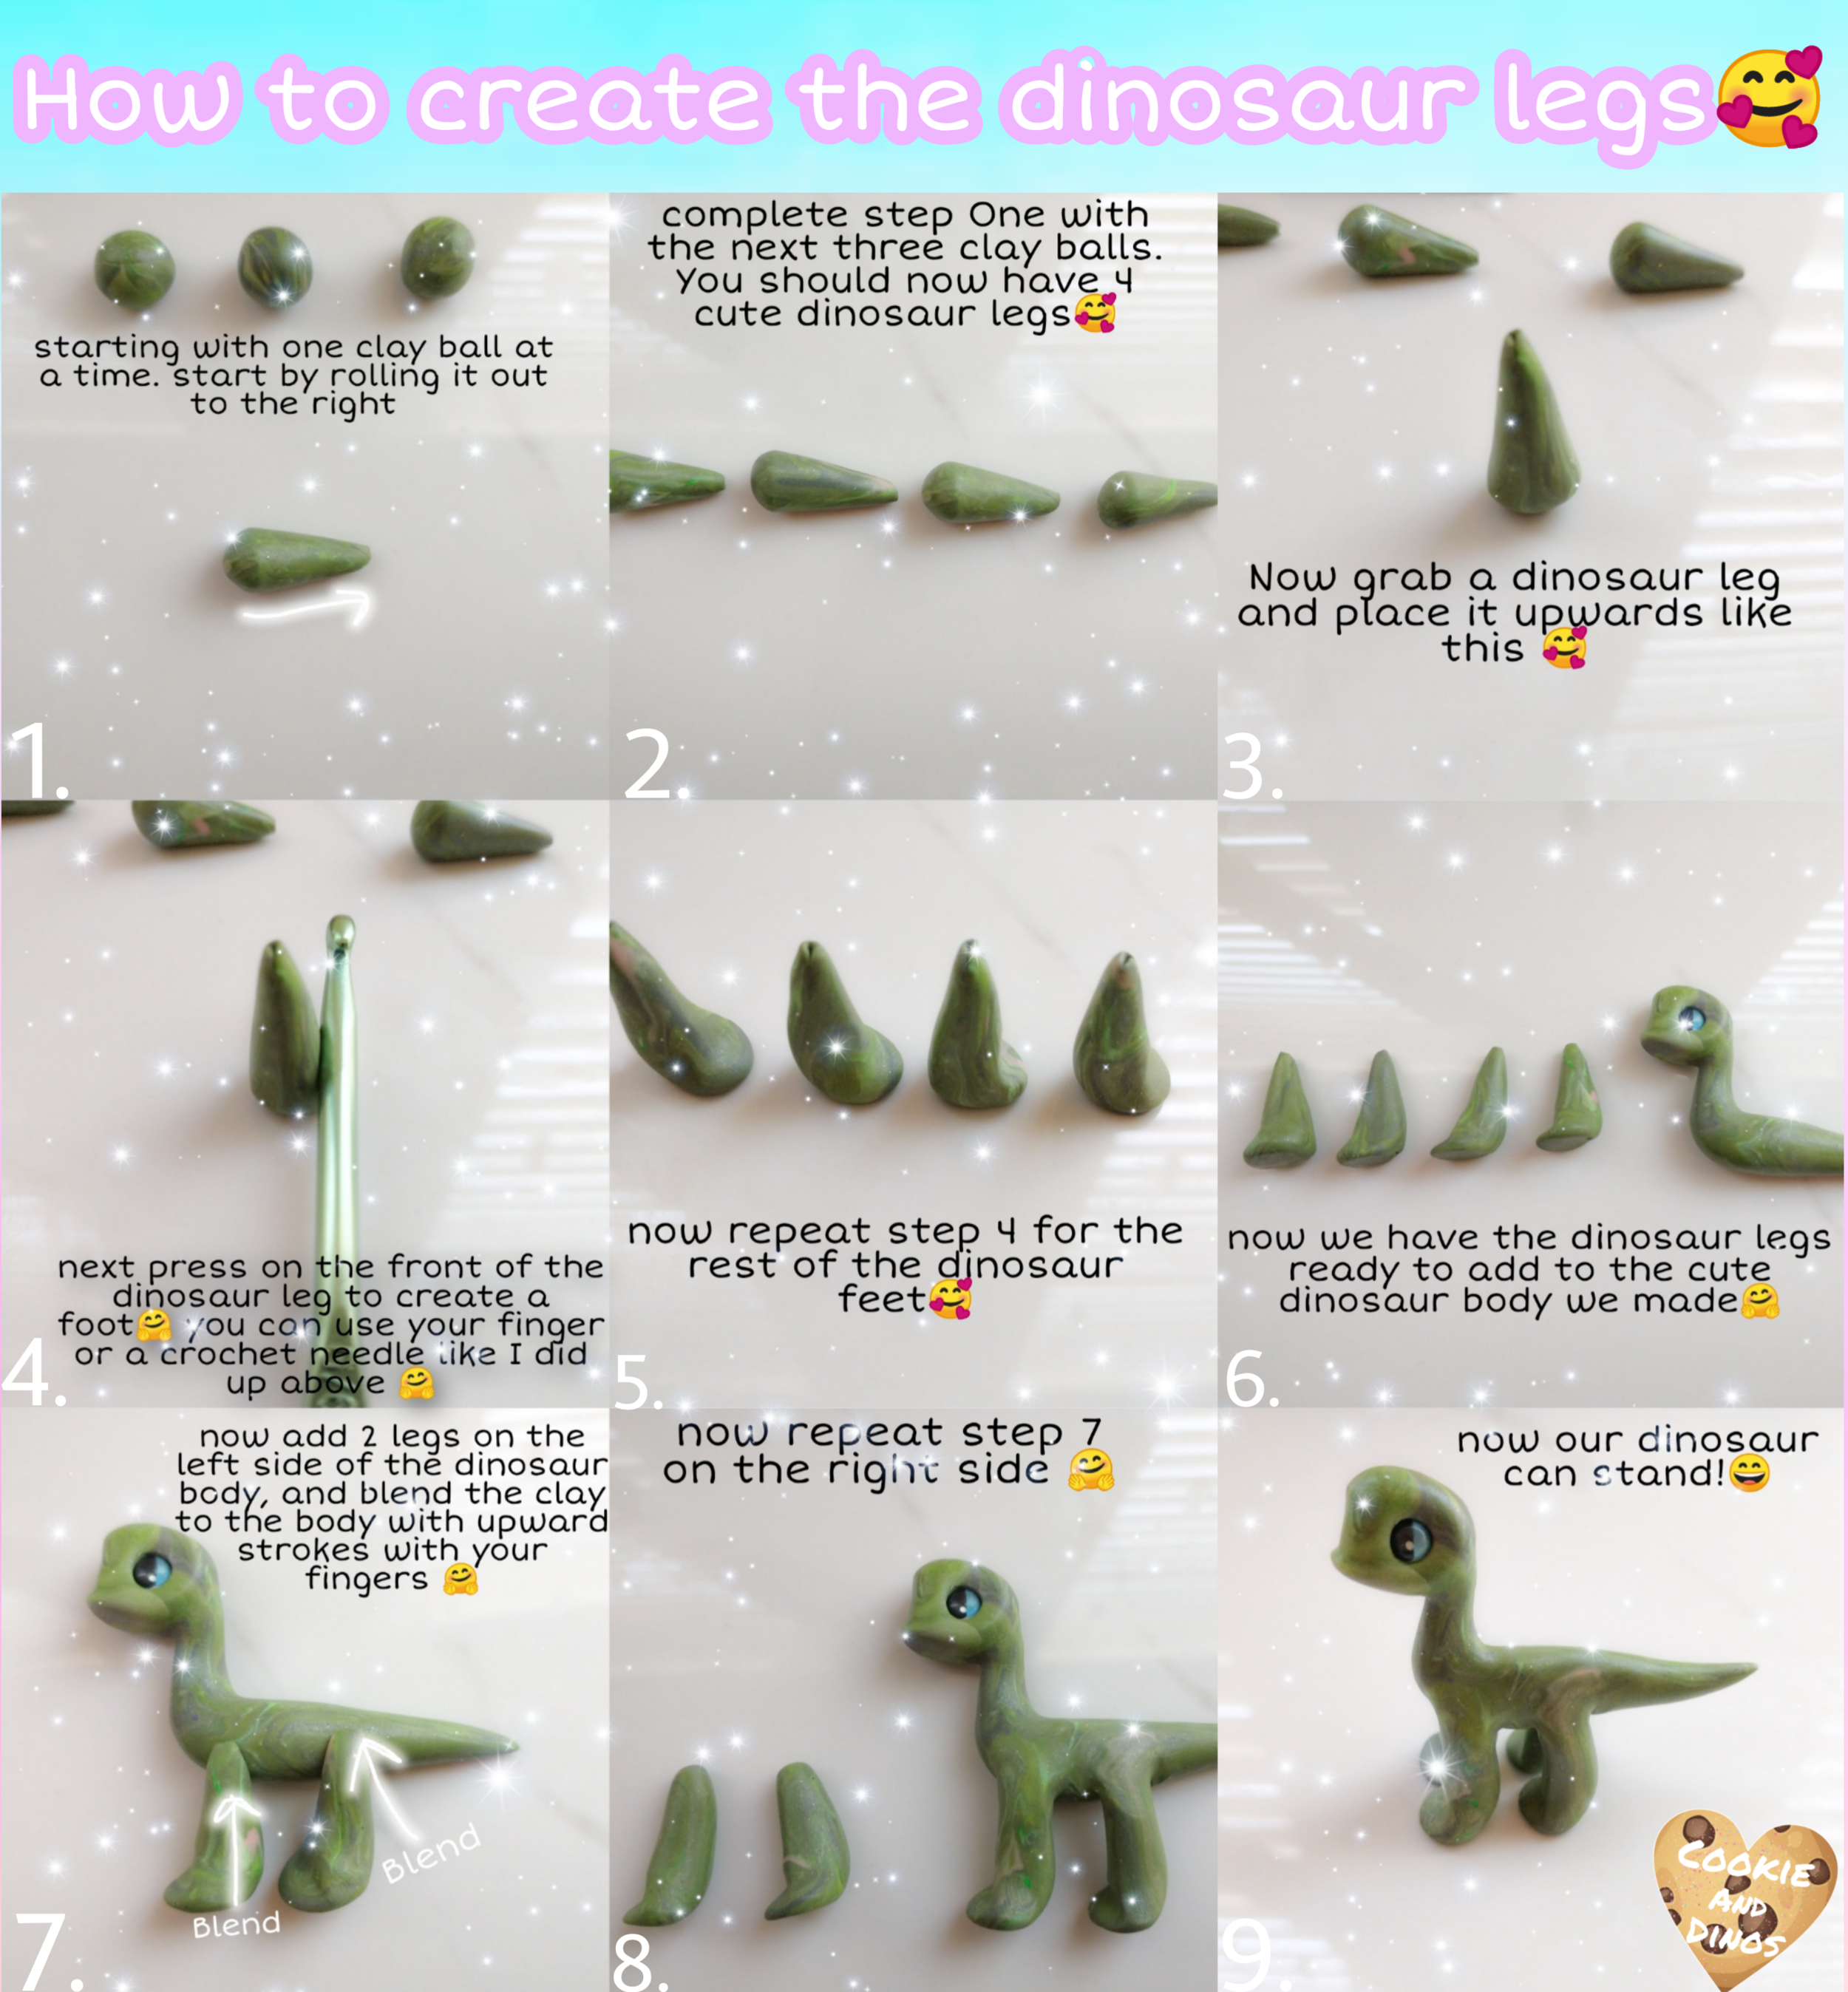 Clay Sculpting Tutorial with Cookie and Dinos